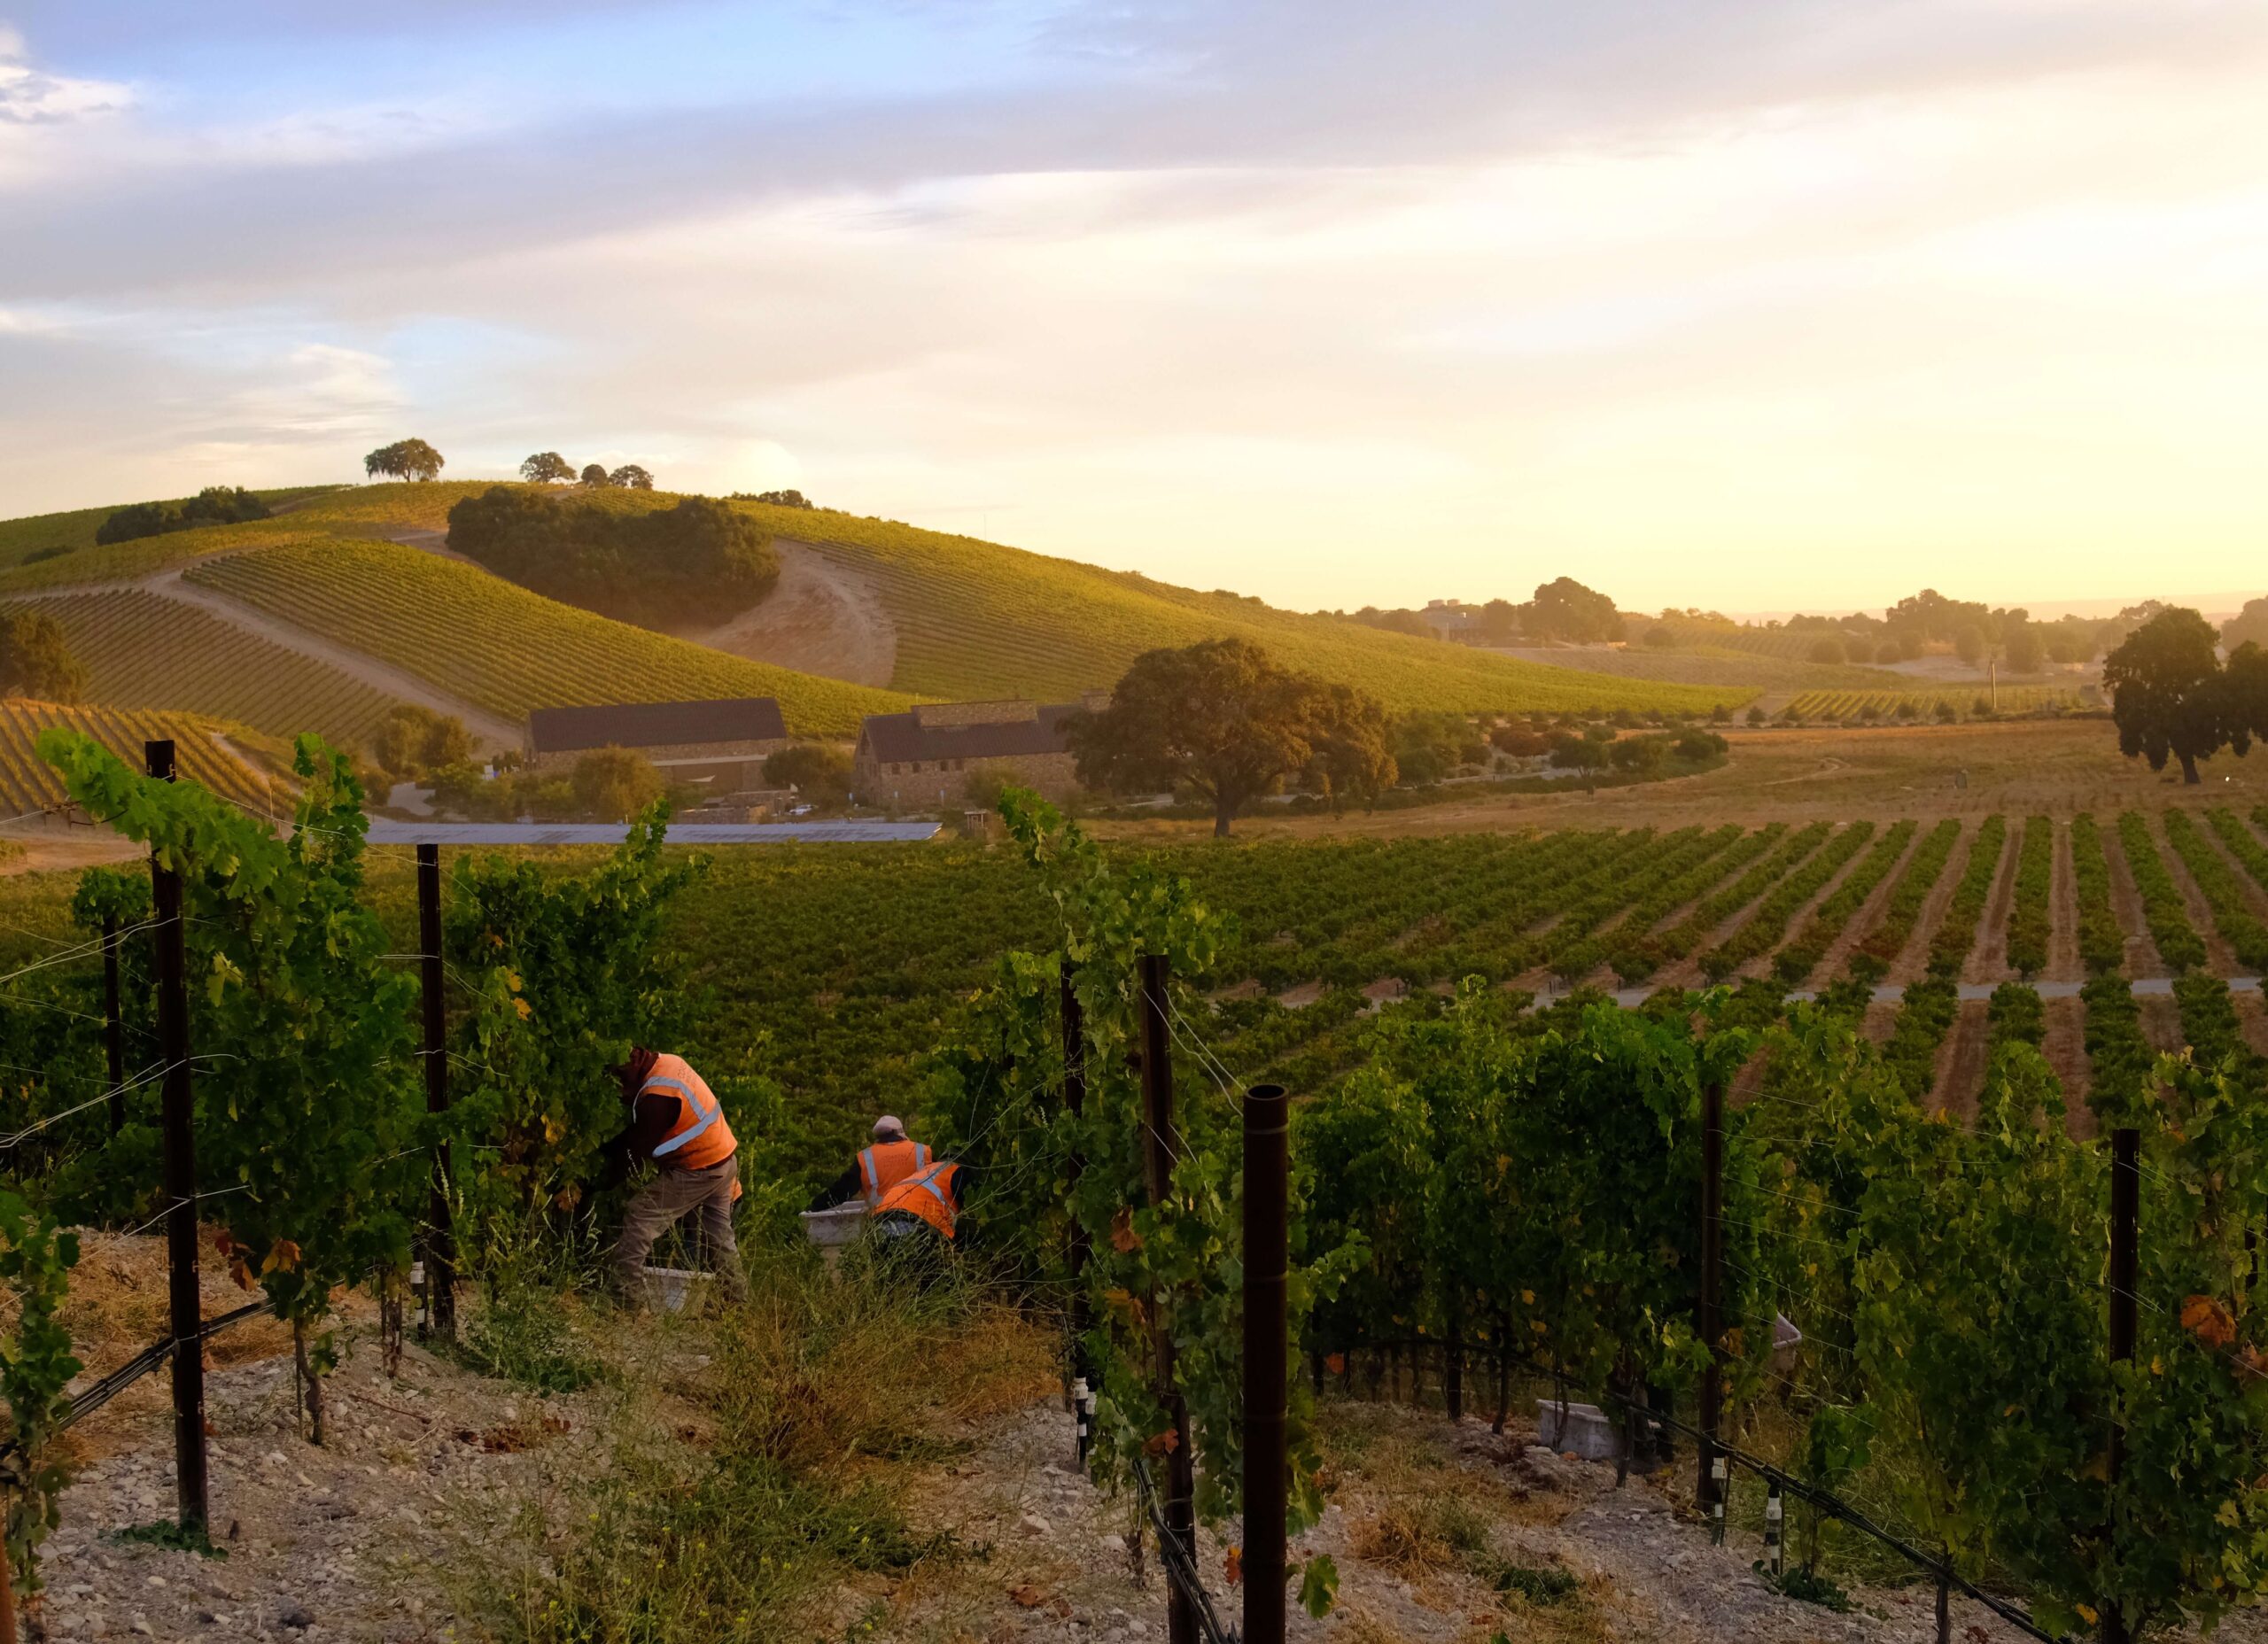 Harvesting Cabernet Sauvignon at sunrise, with vineyards in the foreground and rolling hills and a pink sky in the background.